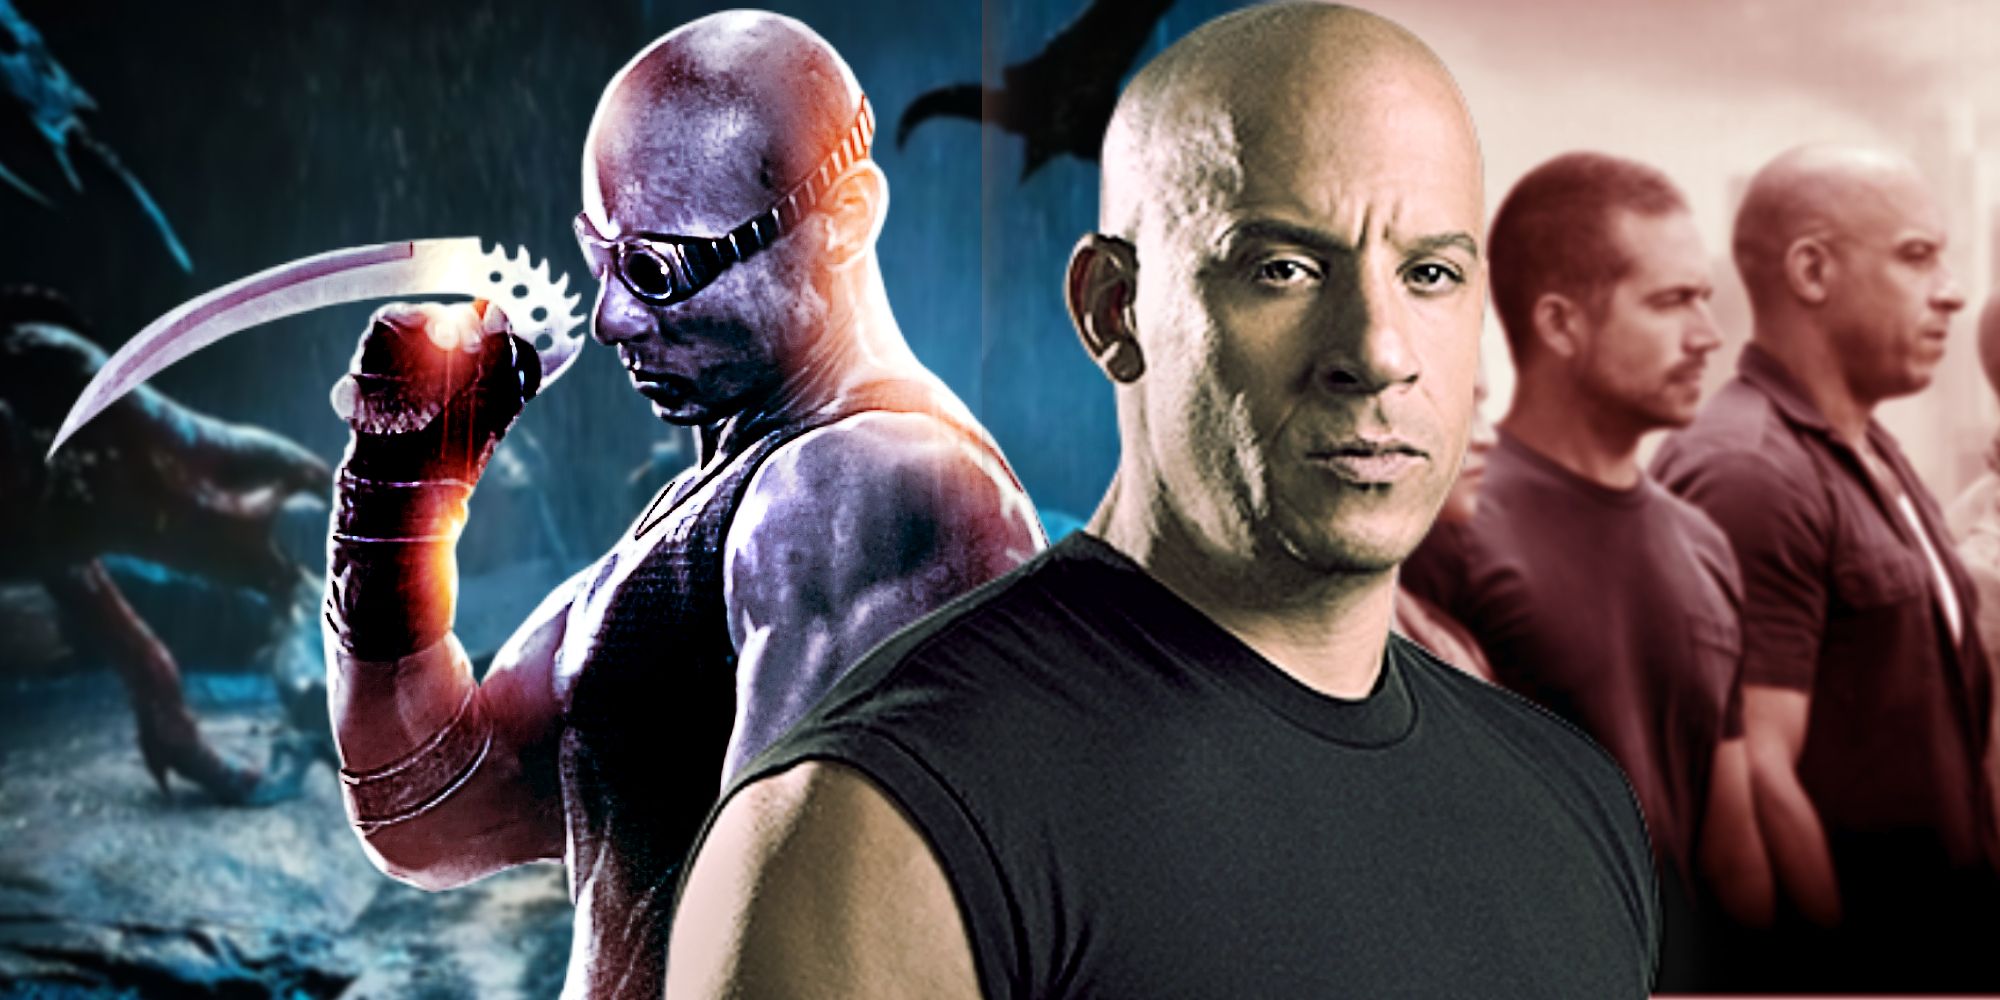 Vin Diesel in Chronicles of Riddick and Fast & Furious